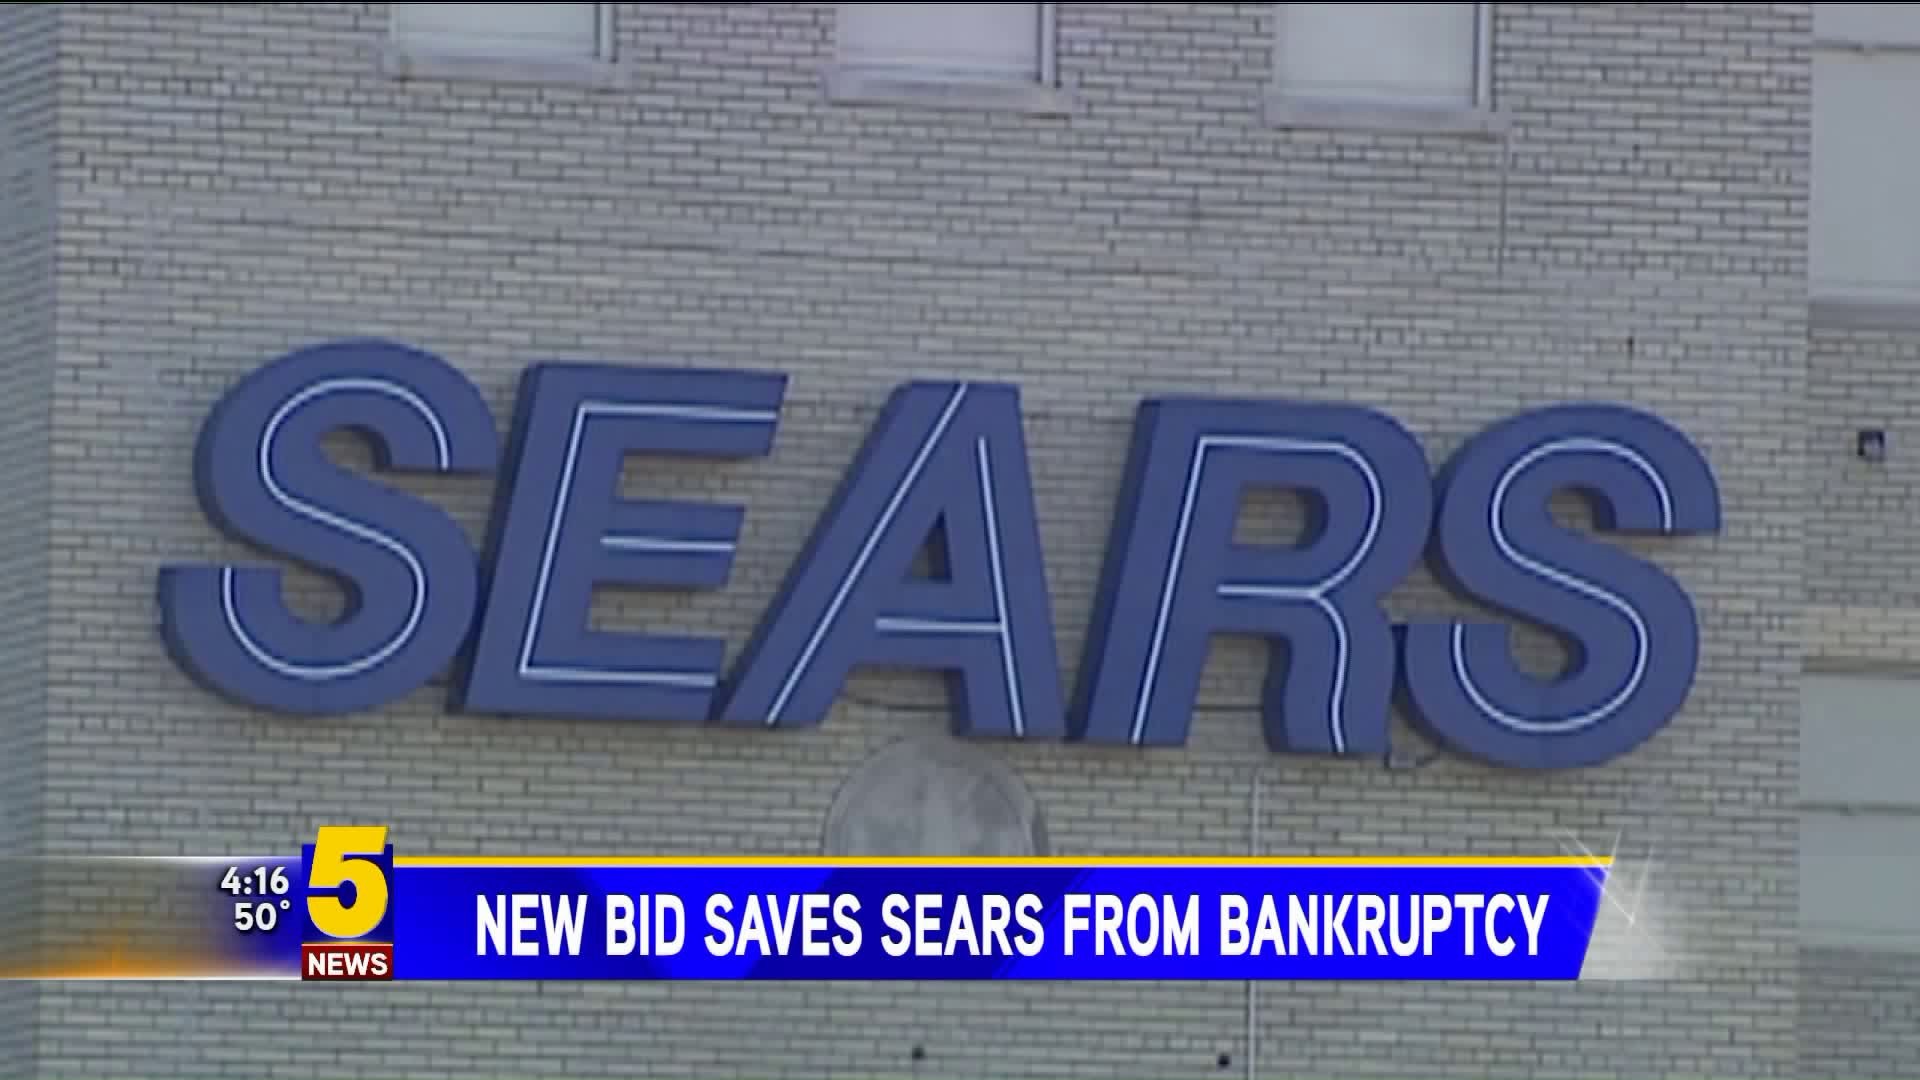 New Bid Saves Sears From Bankruptcy